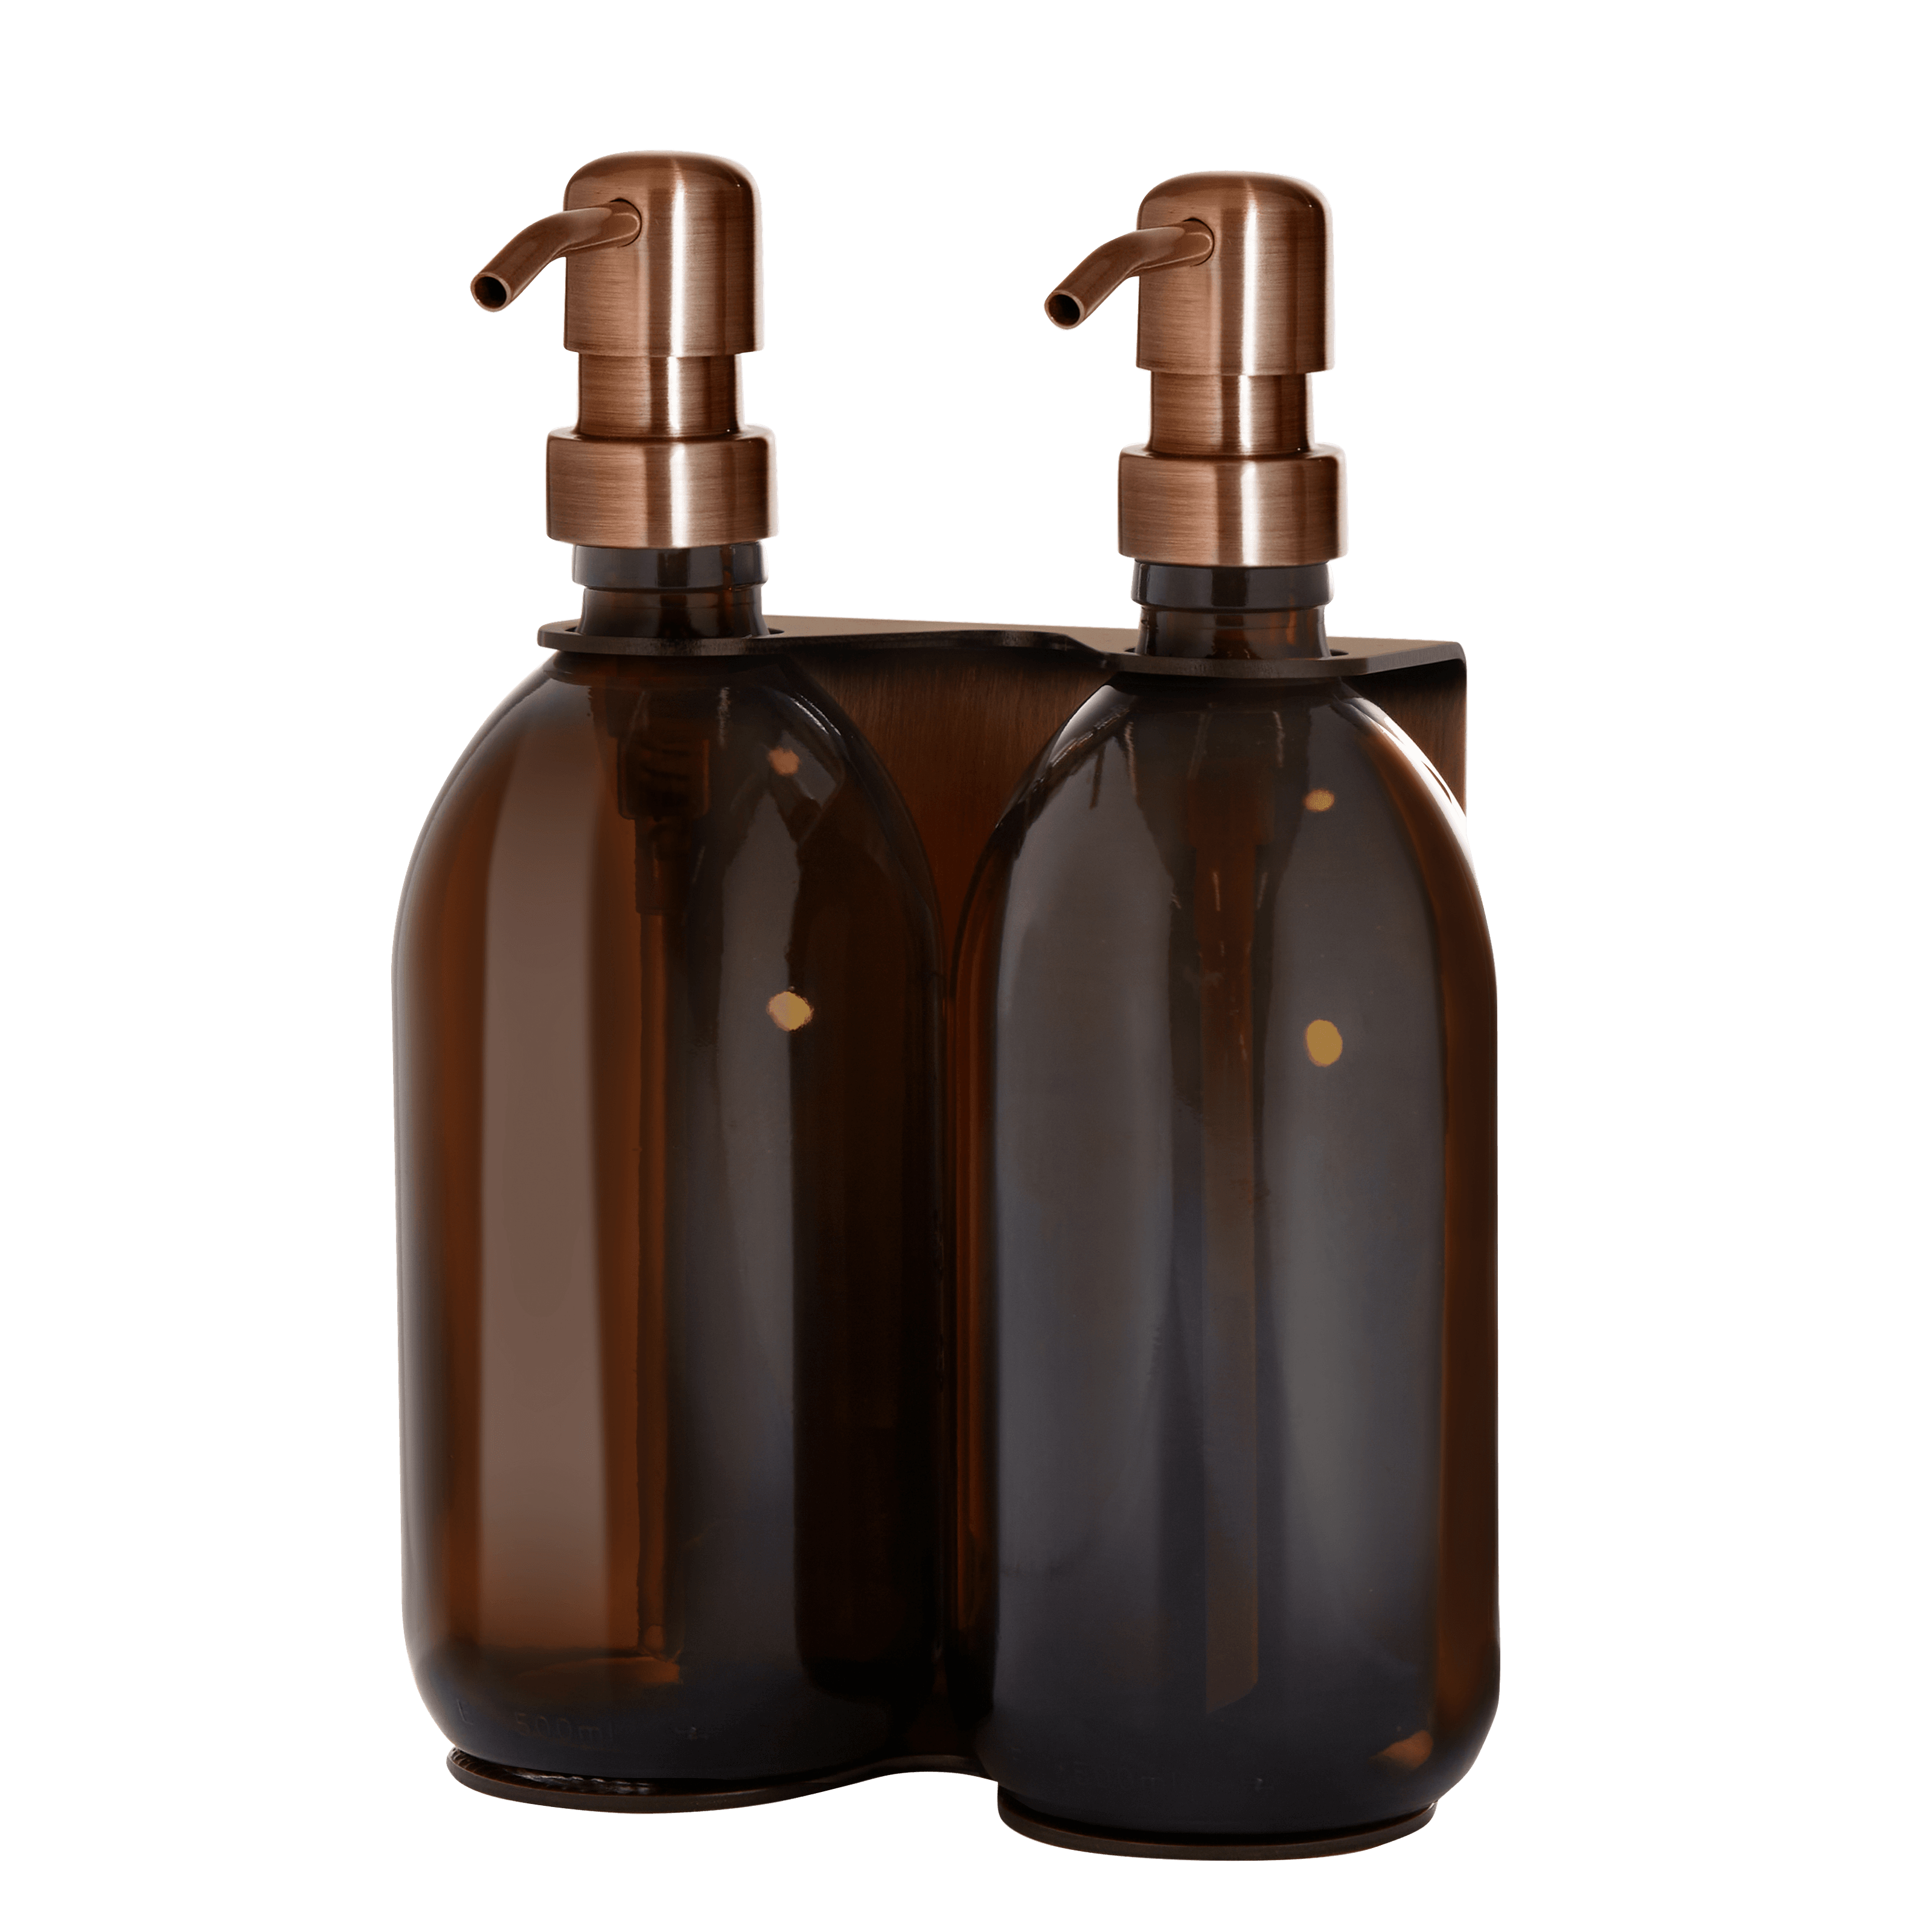 Copper Double Wall mounted Holder with 250ml Amber Bottles and Copper Pump